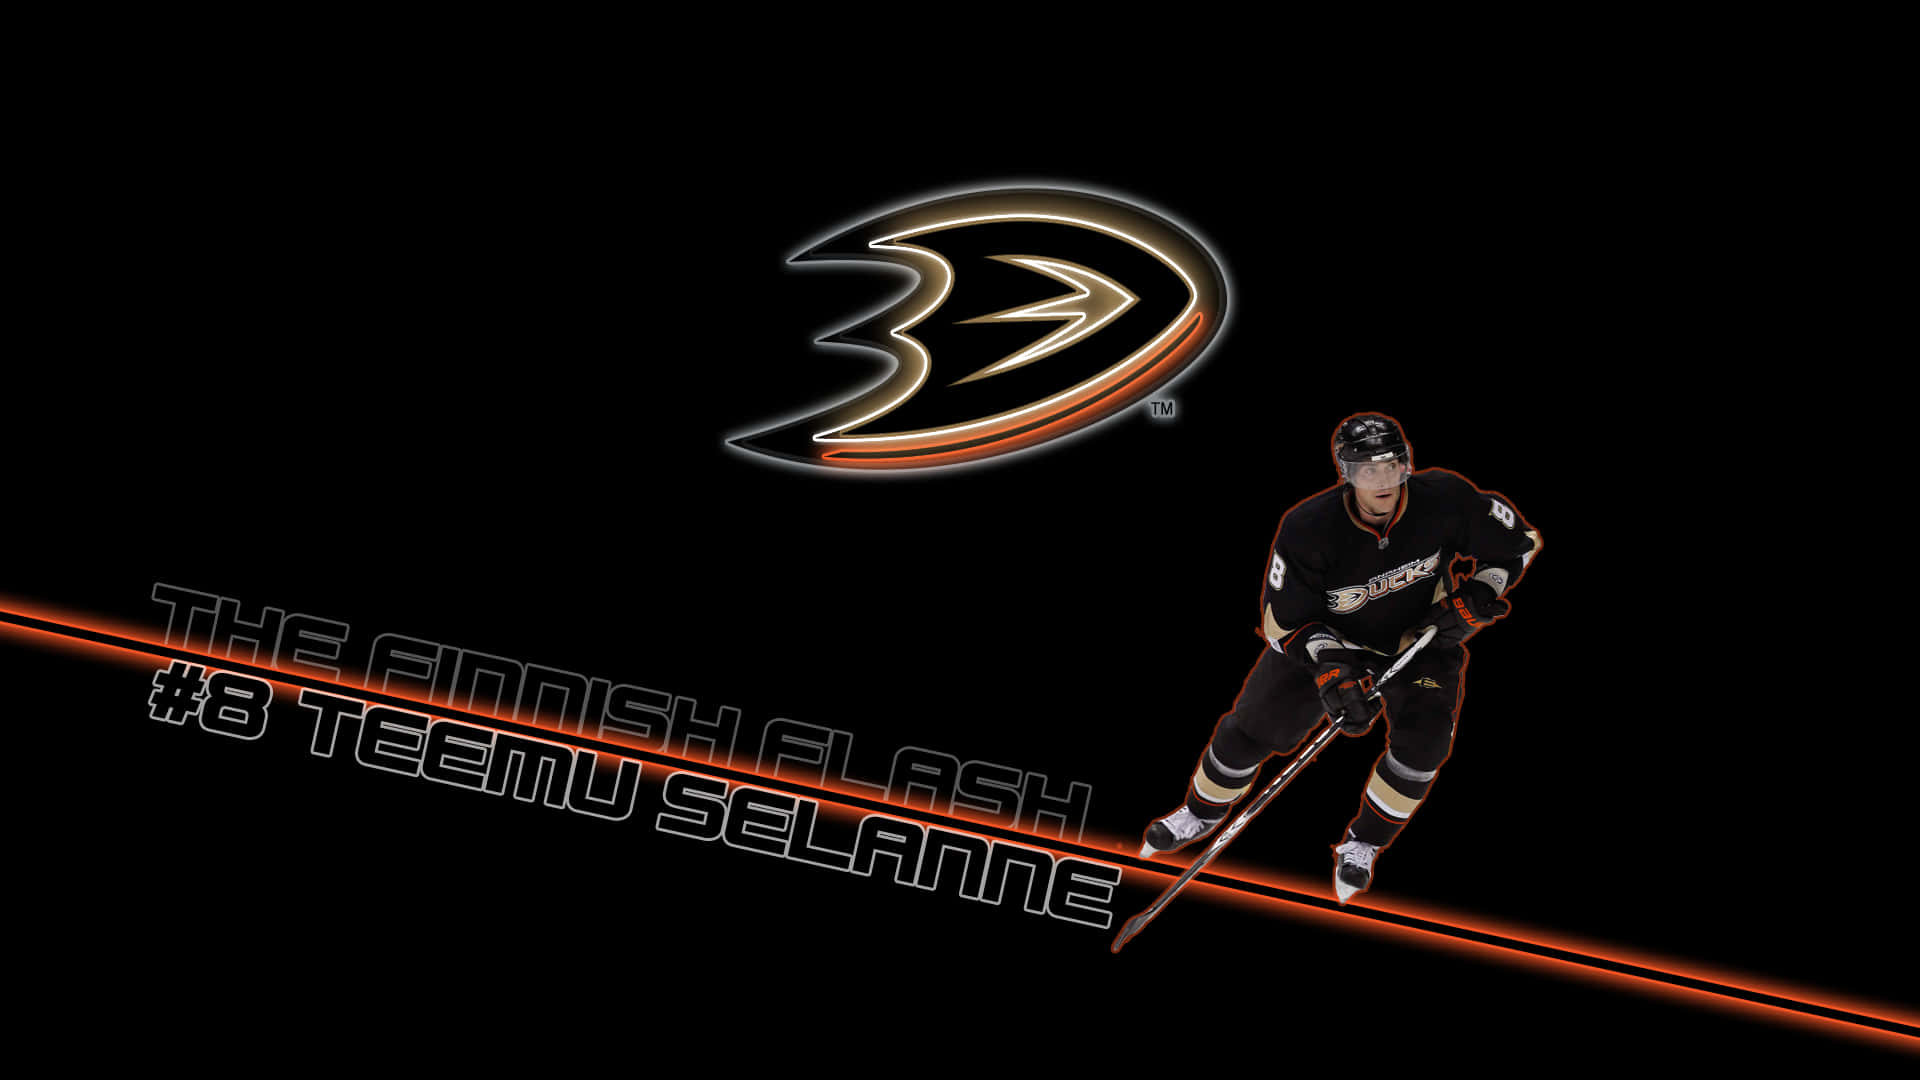 Get Ready To Cheer On The Anaheim Ducks!